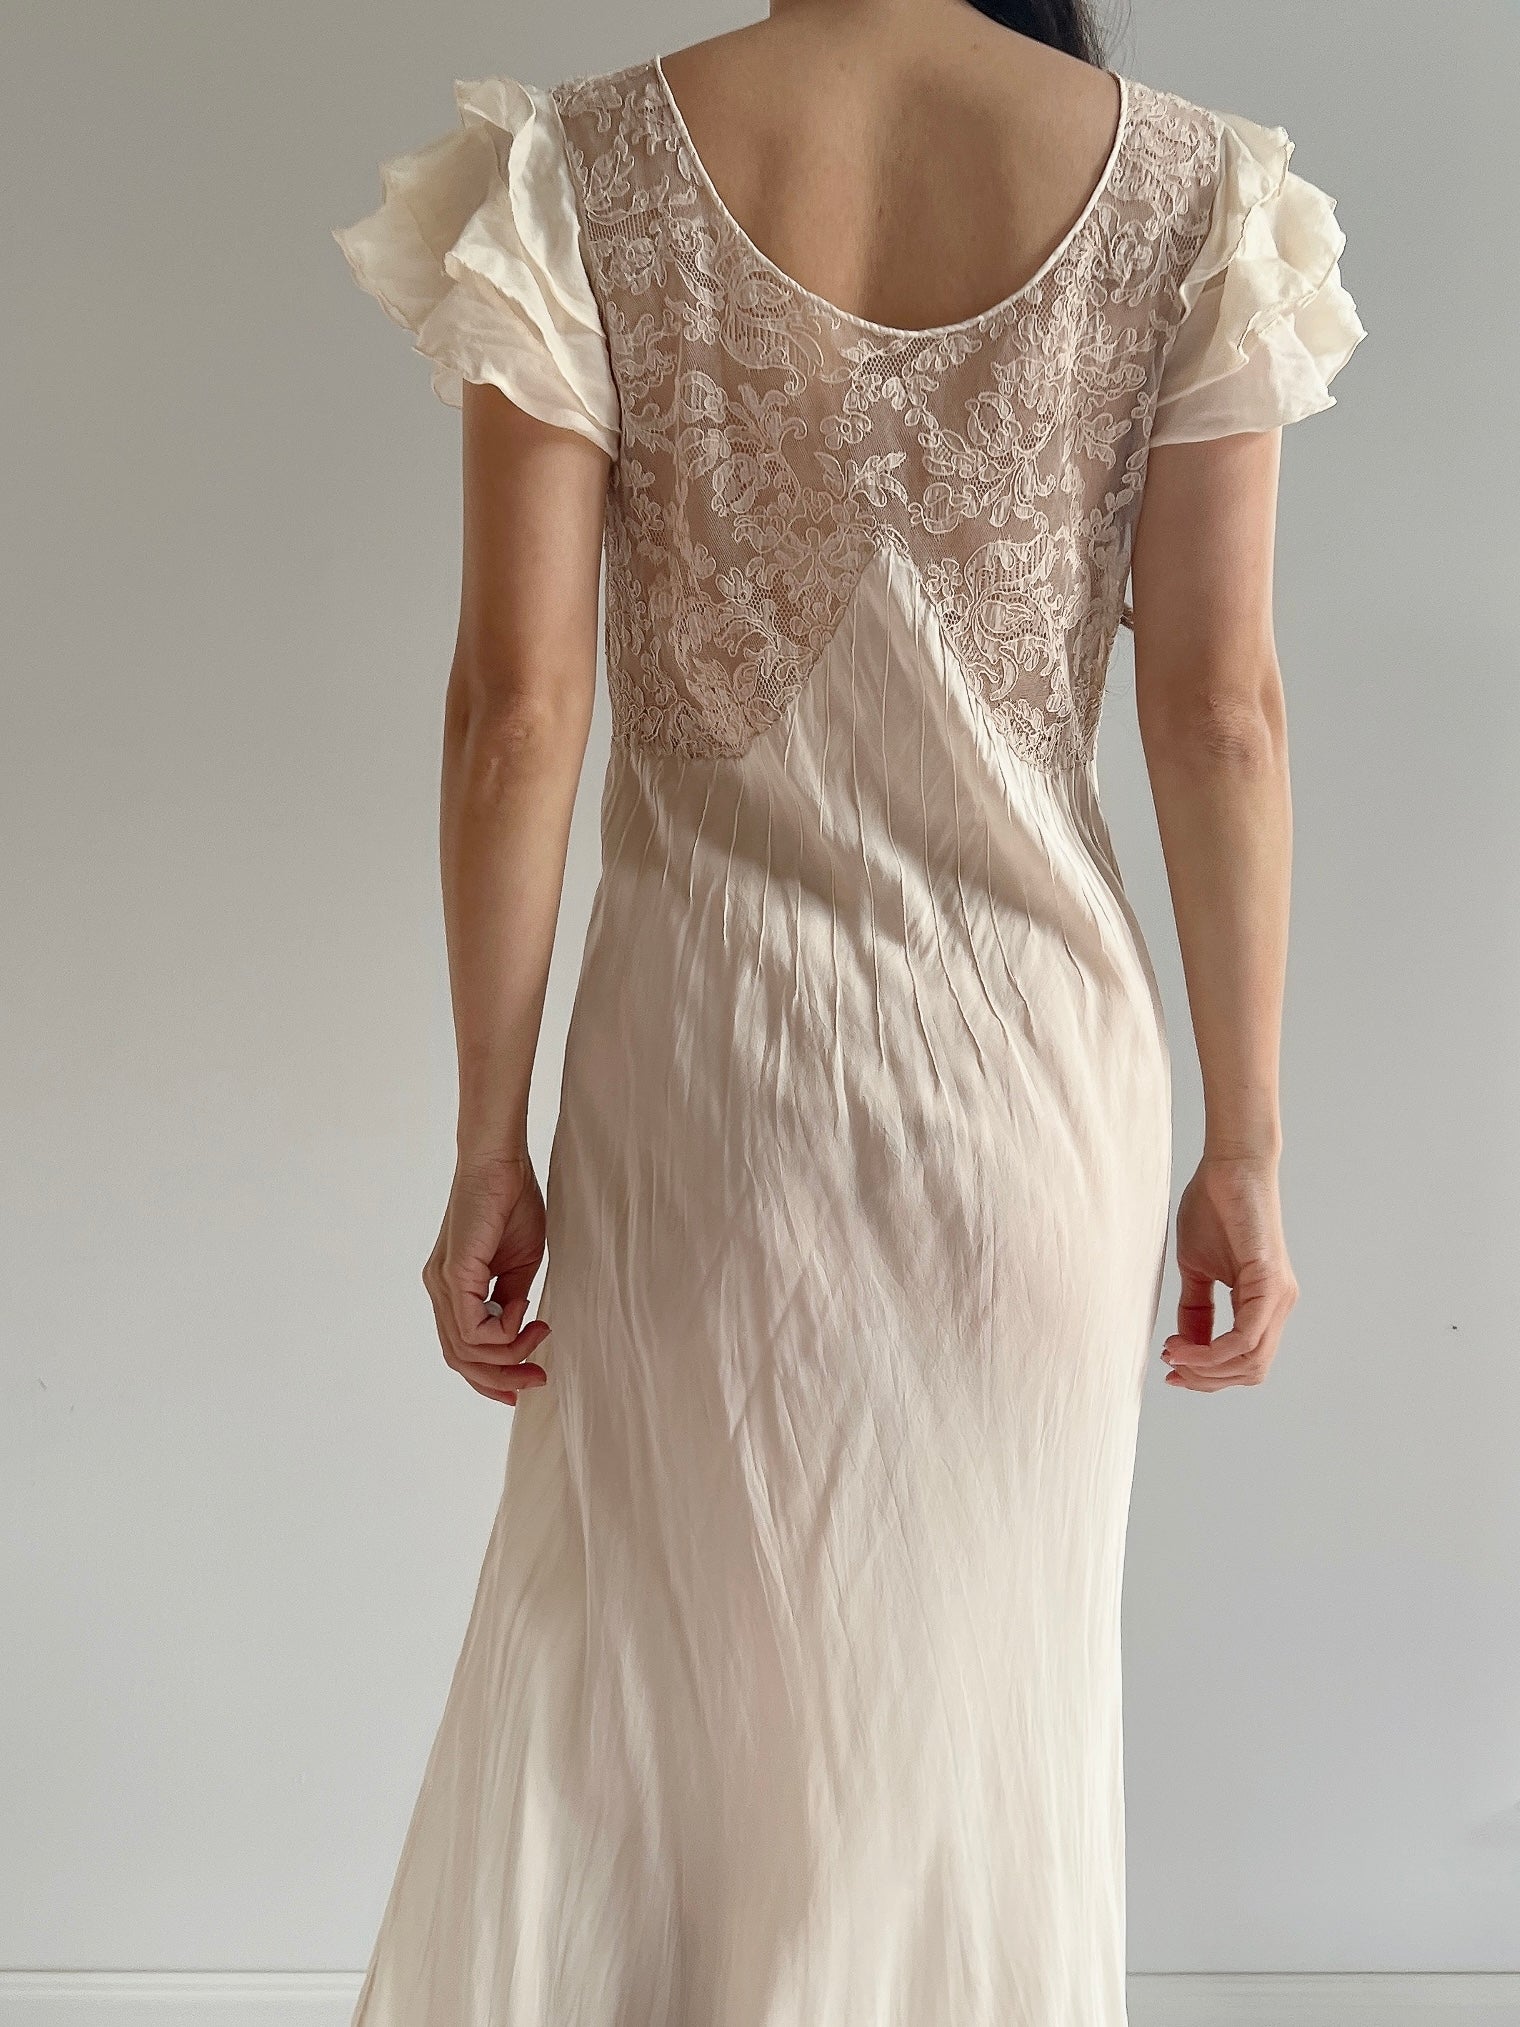 1930s Silk and Lace Dress - S